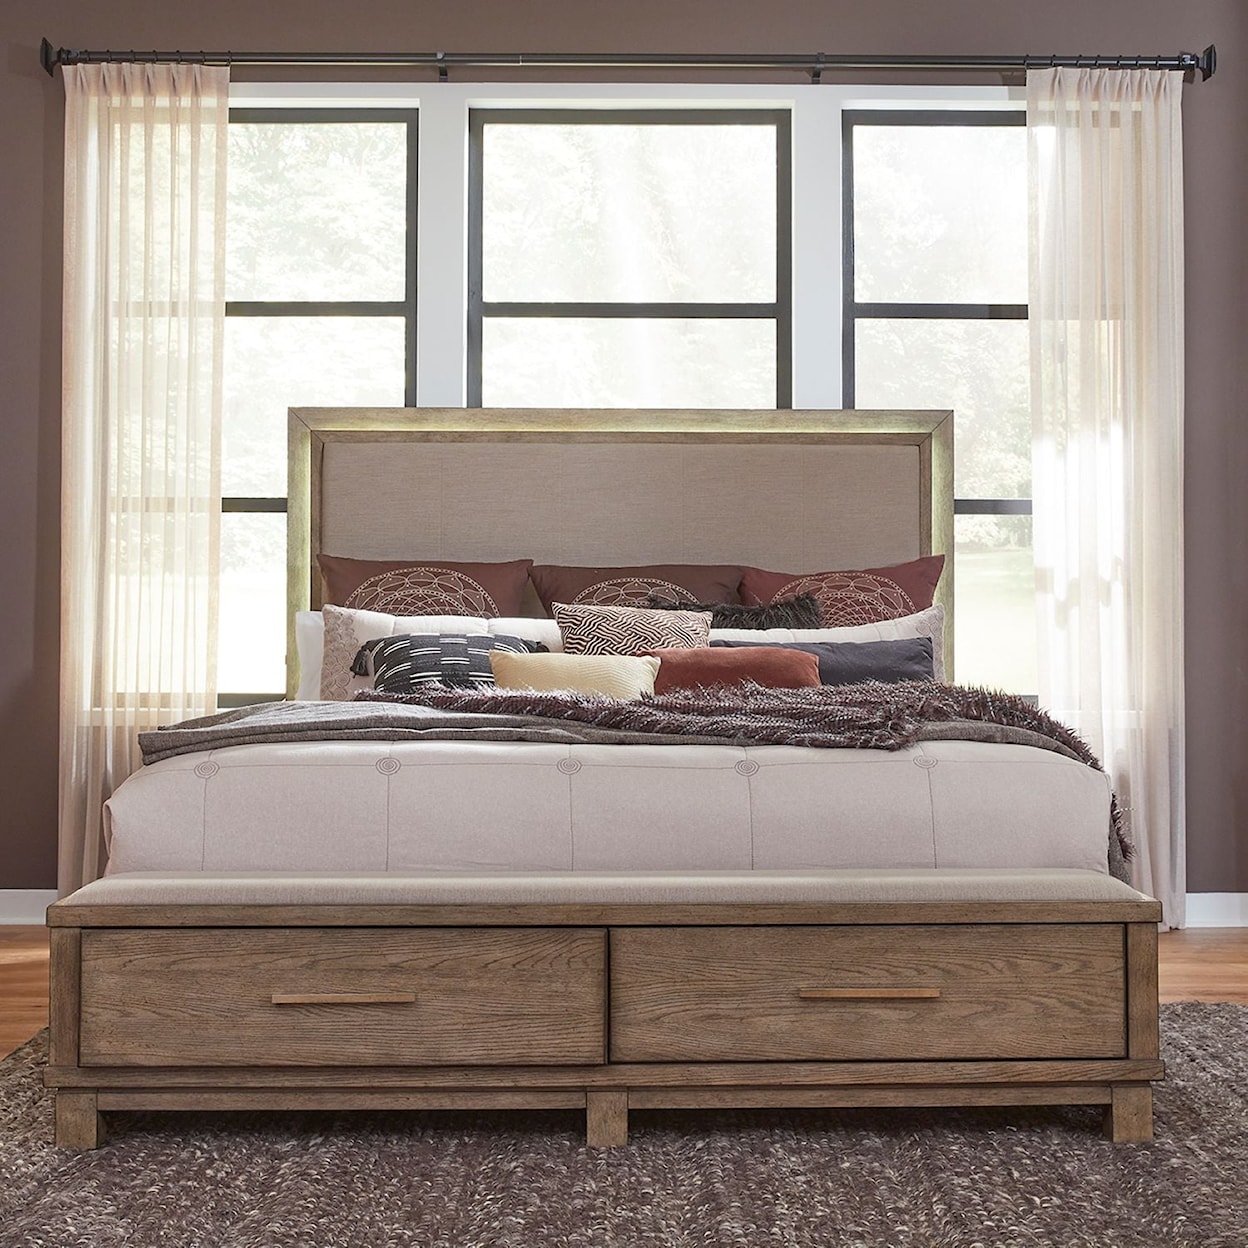 Libby Canyon Road 4-Piece King Bedroom Group